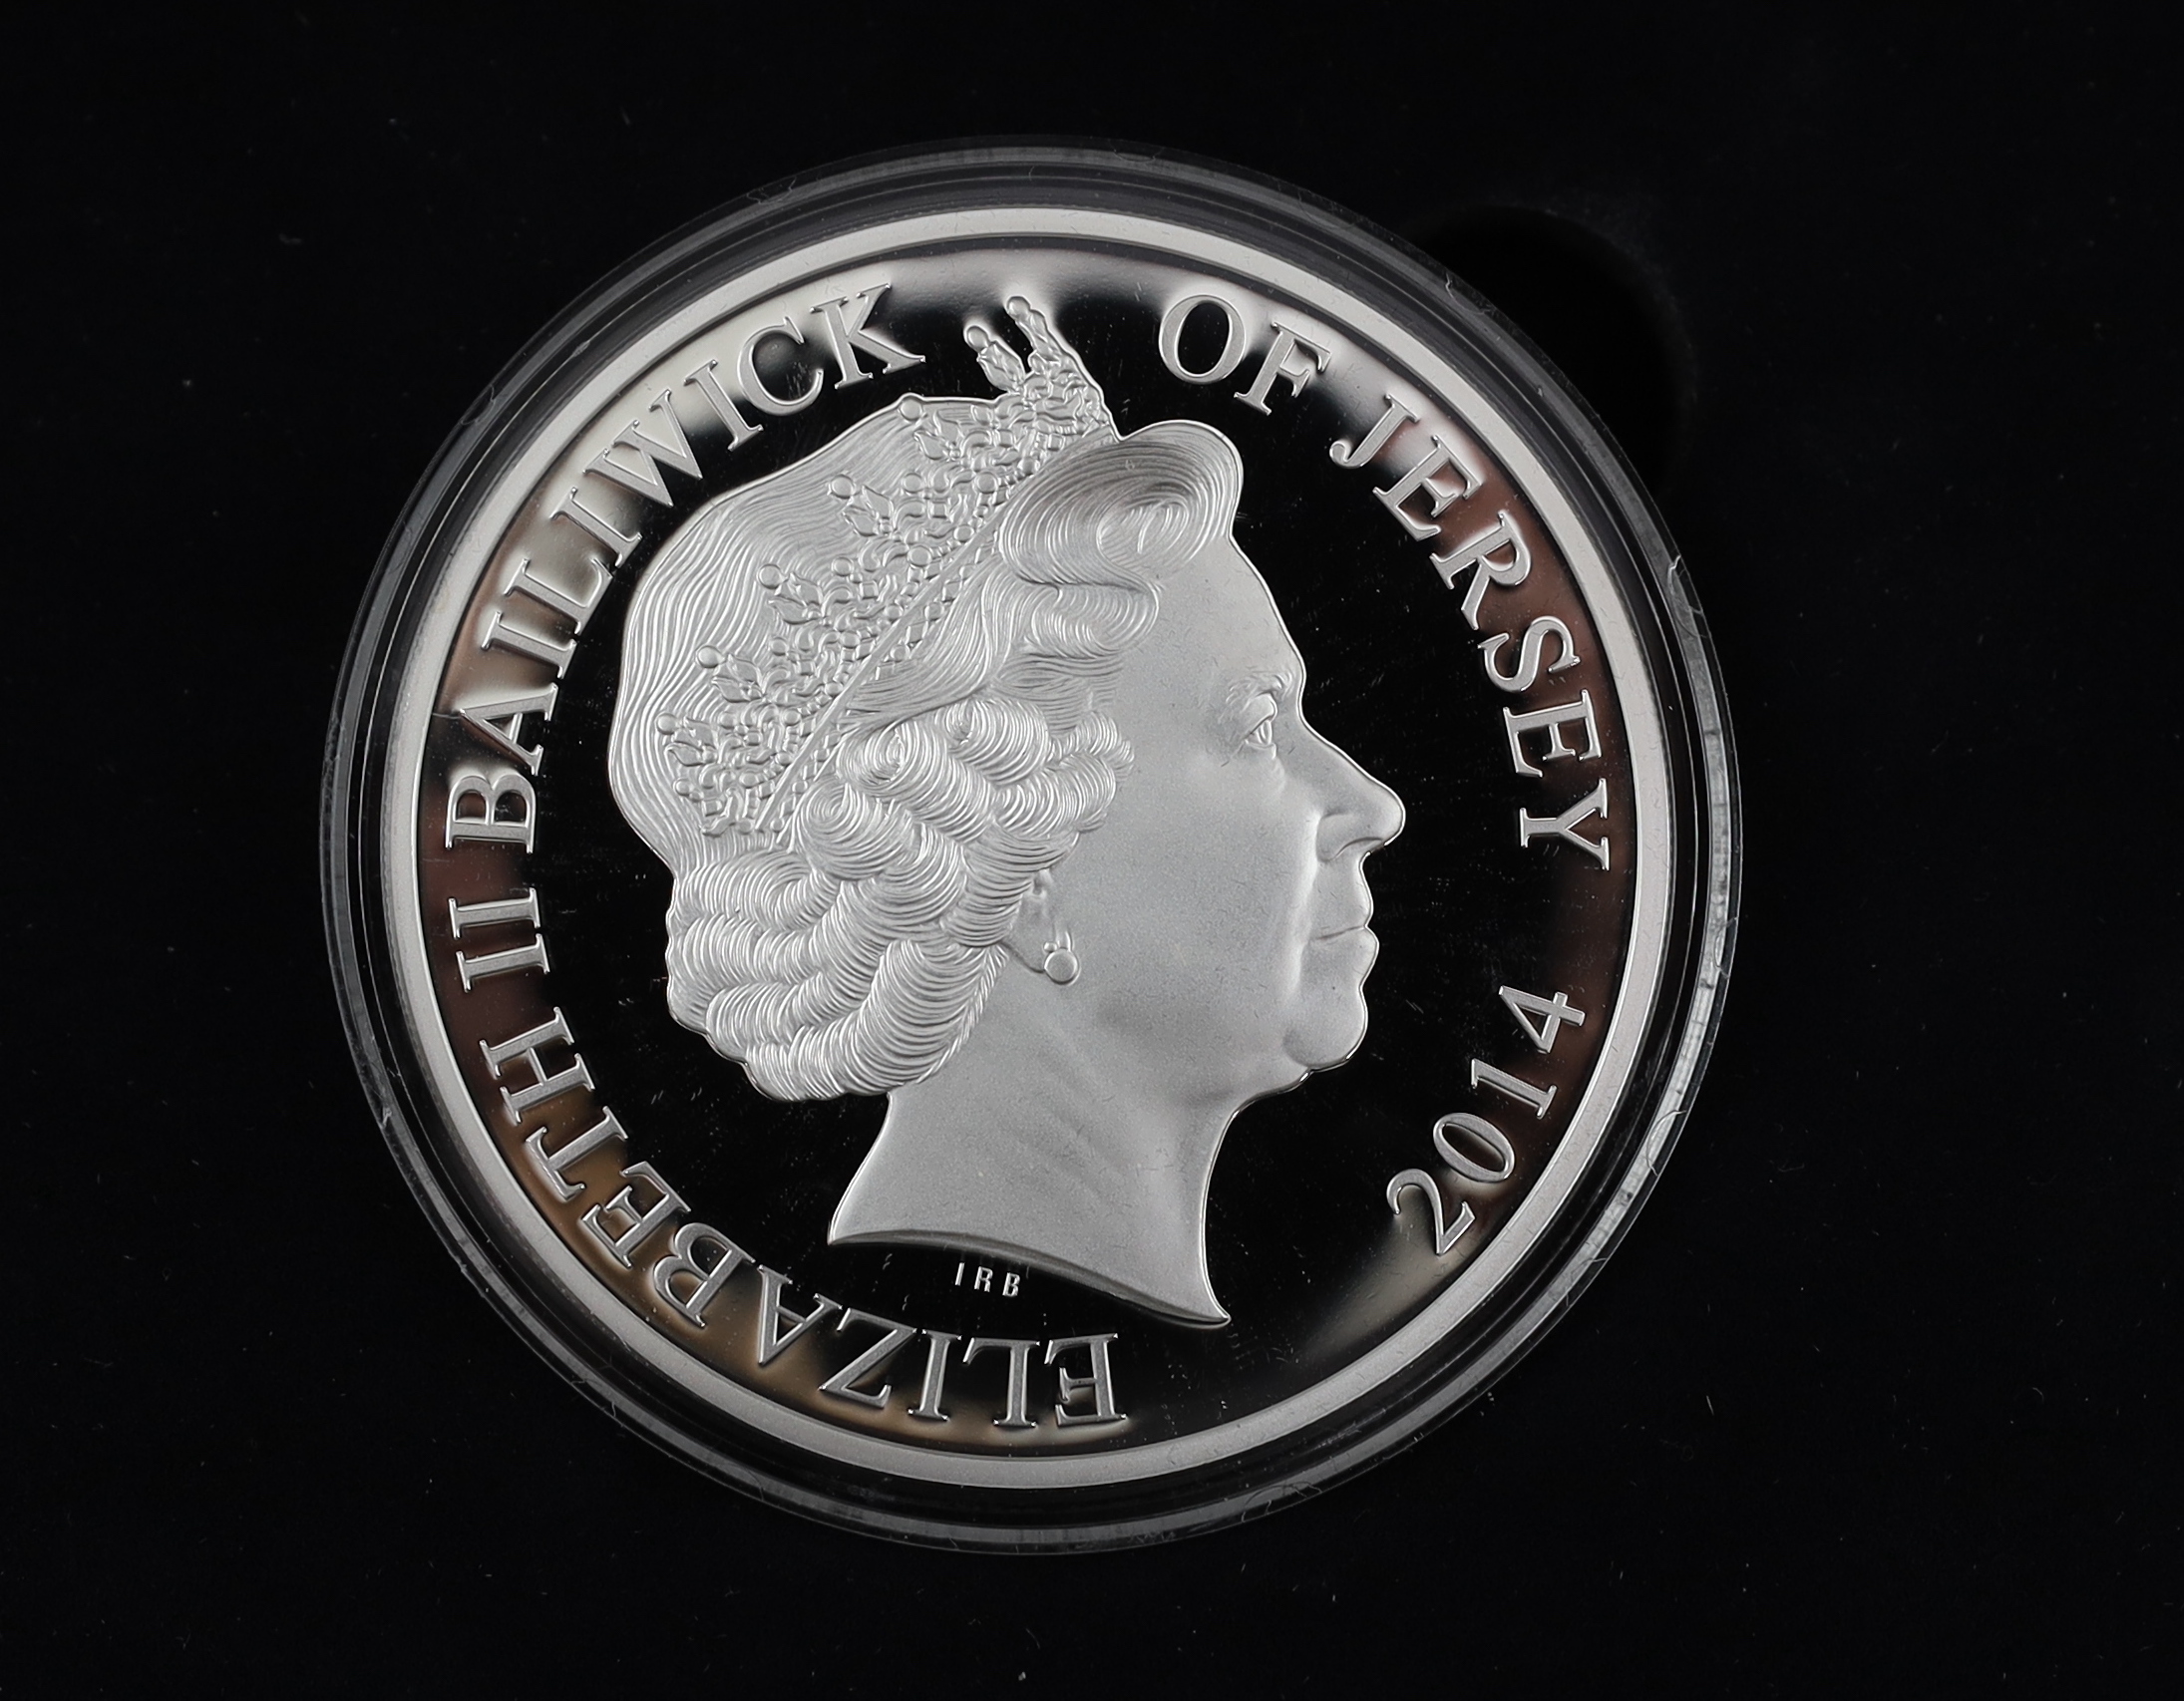 QEII and modern commemorative proof silver coins - Jersey 2014 2oz. ‘100 poppies’ coin, the First World War Centenary 2oz. numisproof, two London Mint 2009 Tristan de Cunha £5 coins, Royal Mint 2009 countdown XXX Olympia